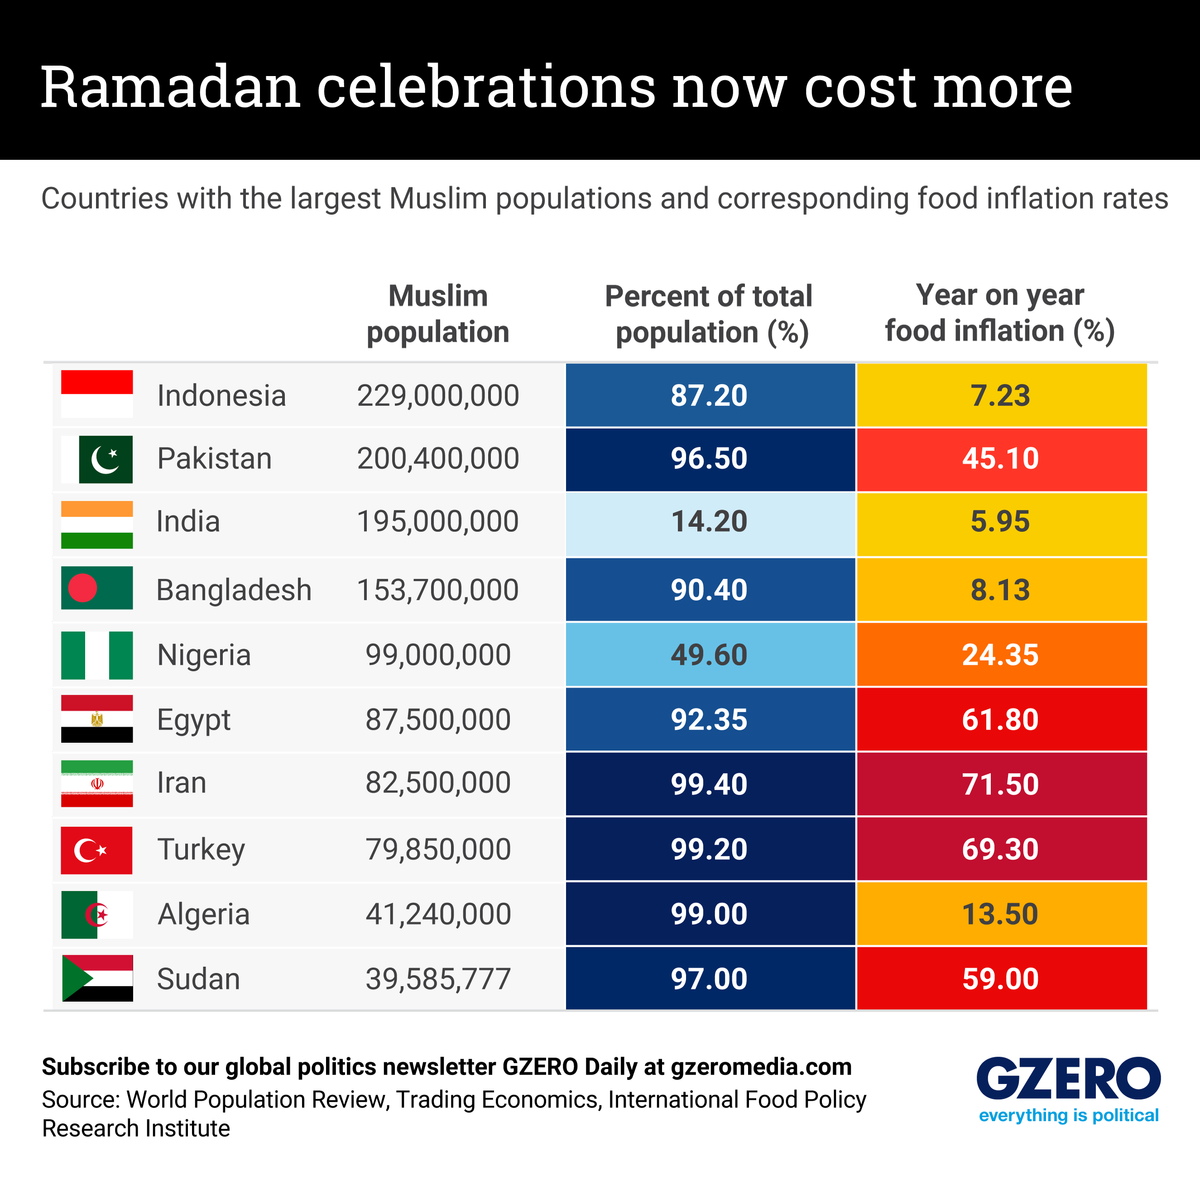 A chart comparing countries with the largest Muslim populations with corresponding food inflation rates.